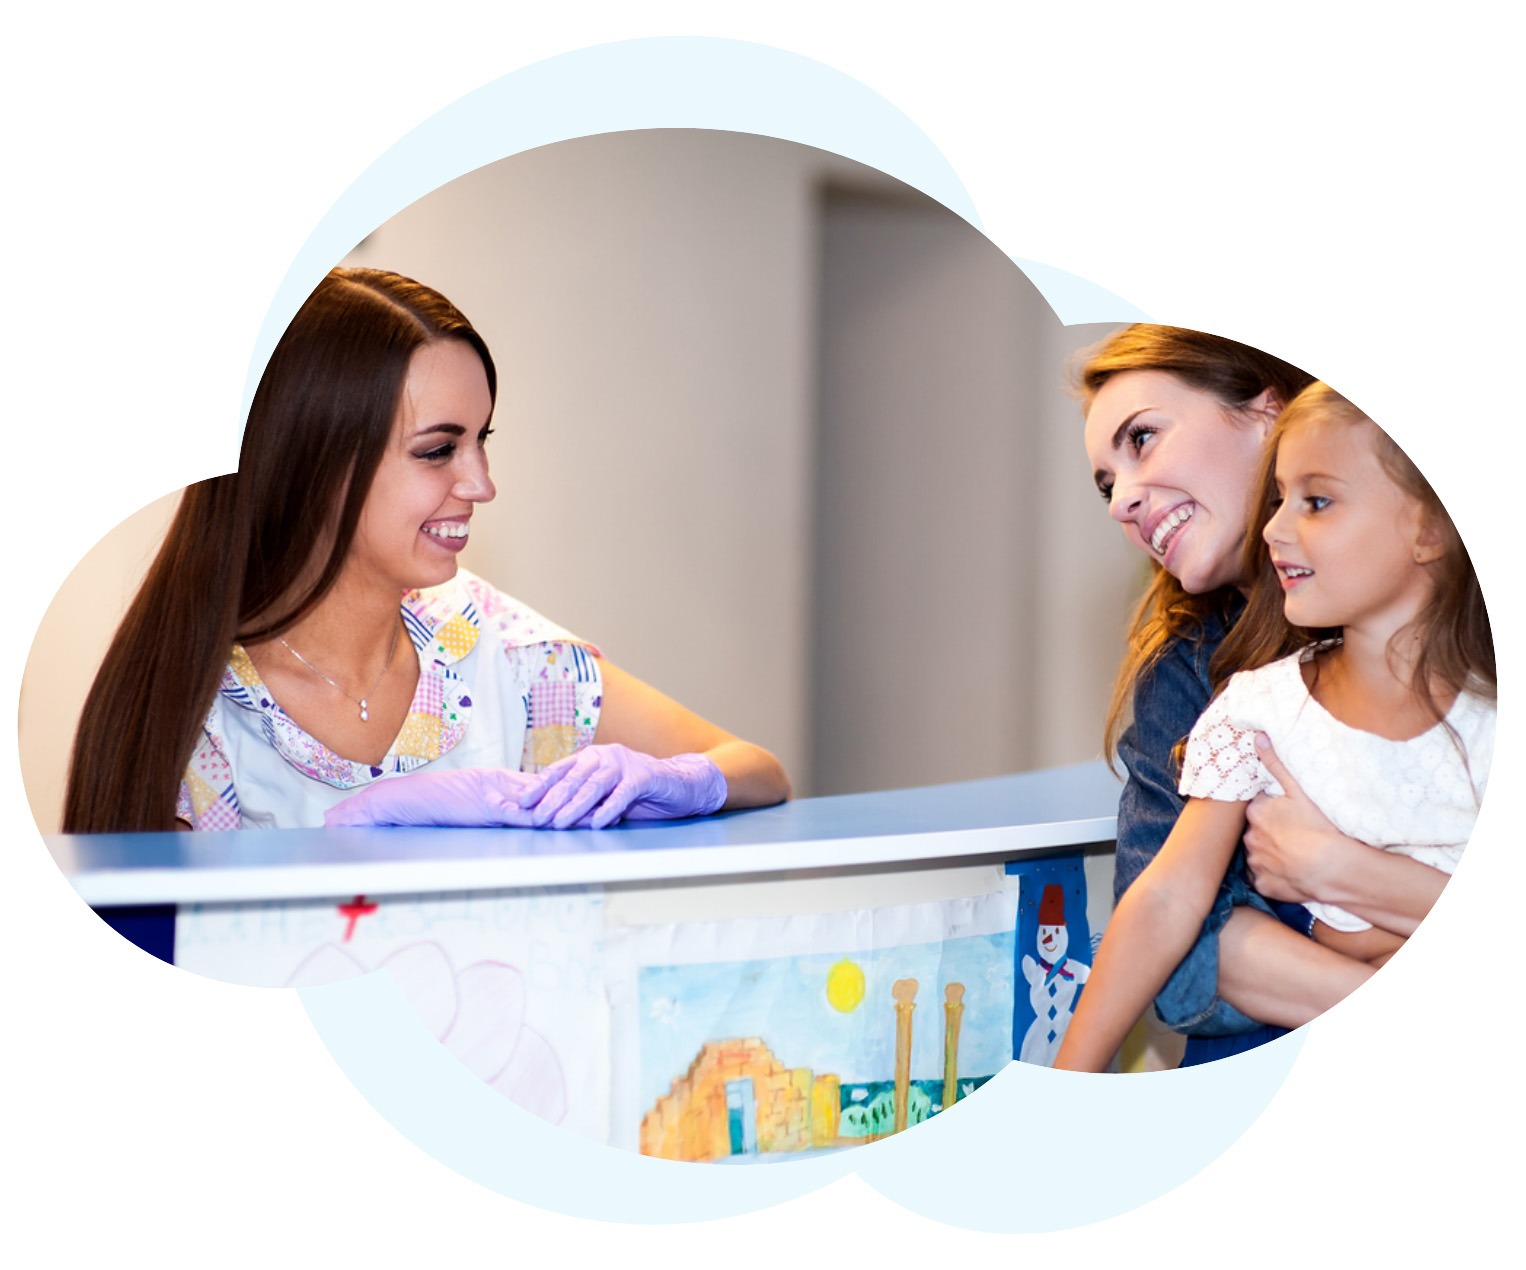 Contact Florida Children's Dentistry